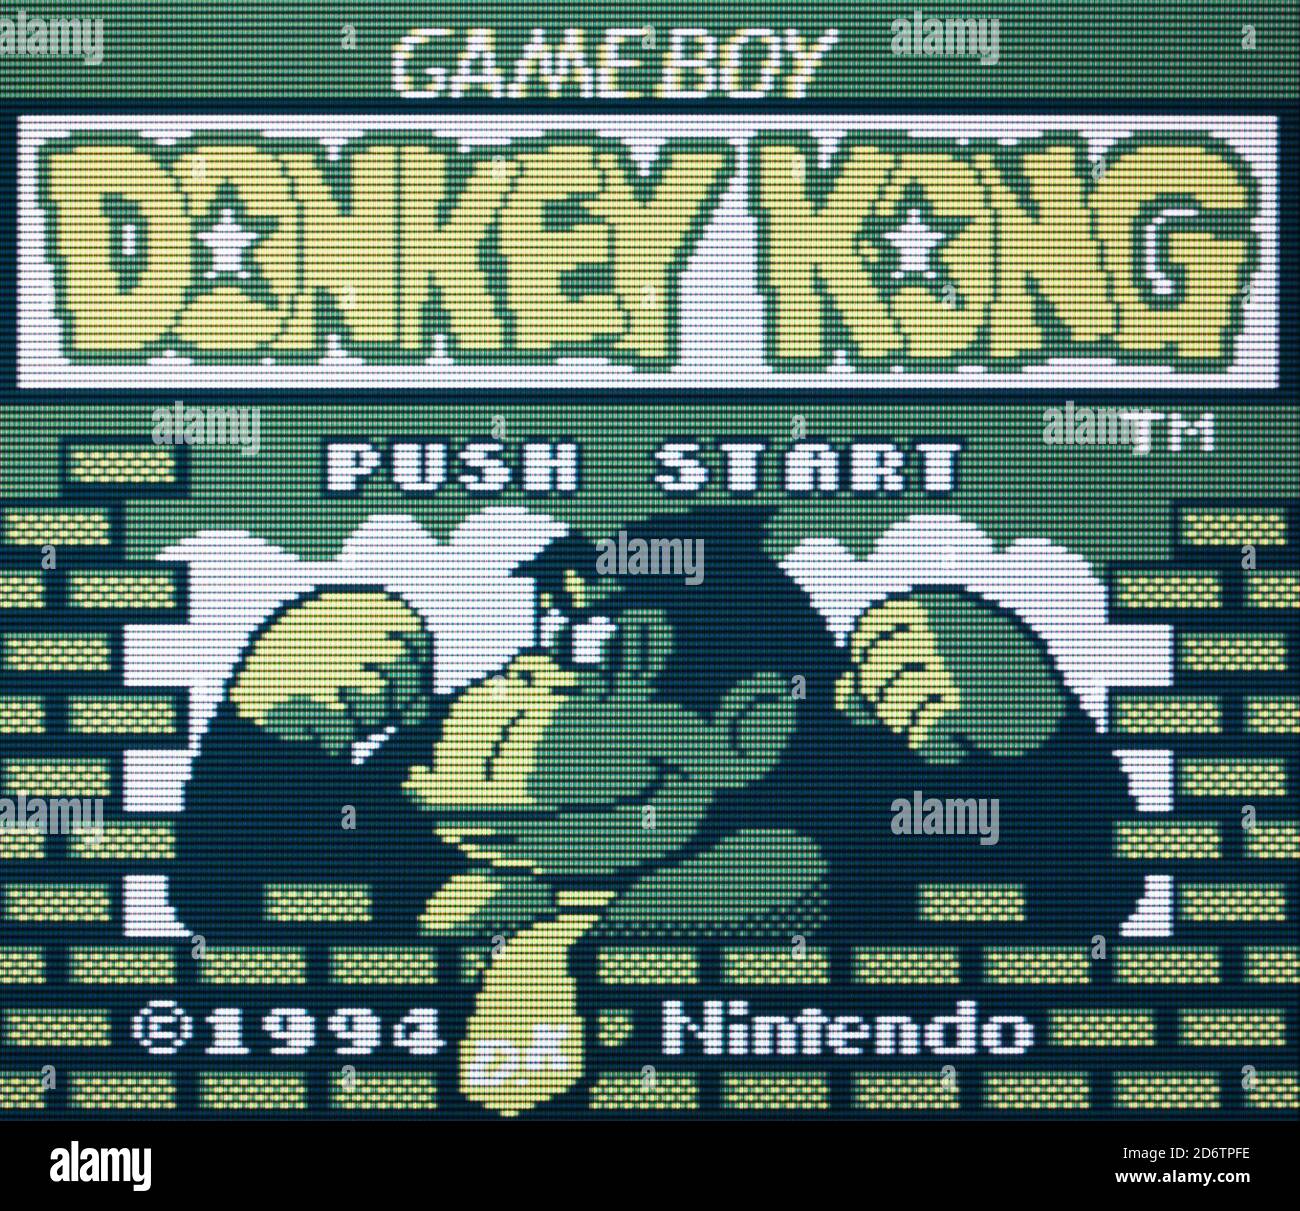 Donkey Kong - Nintendo Gameboy Videogame - Editorial use only Stock Photo